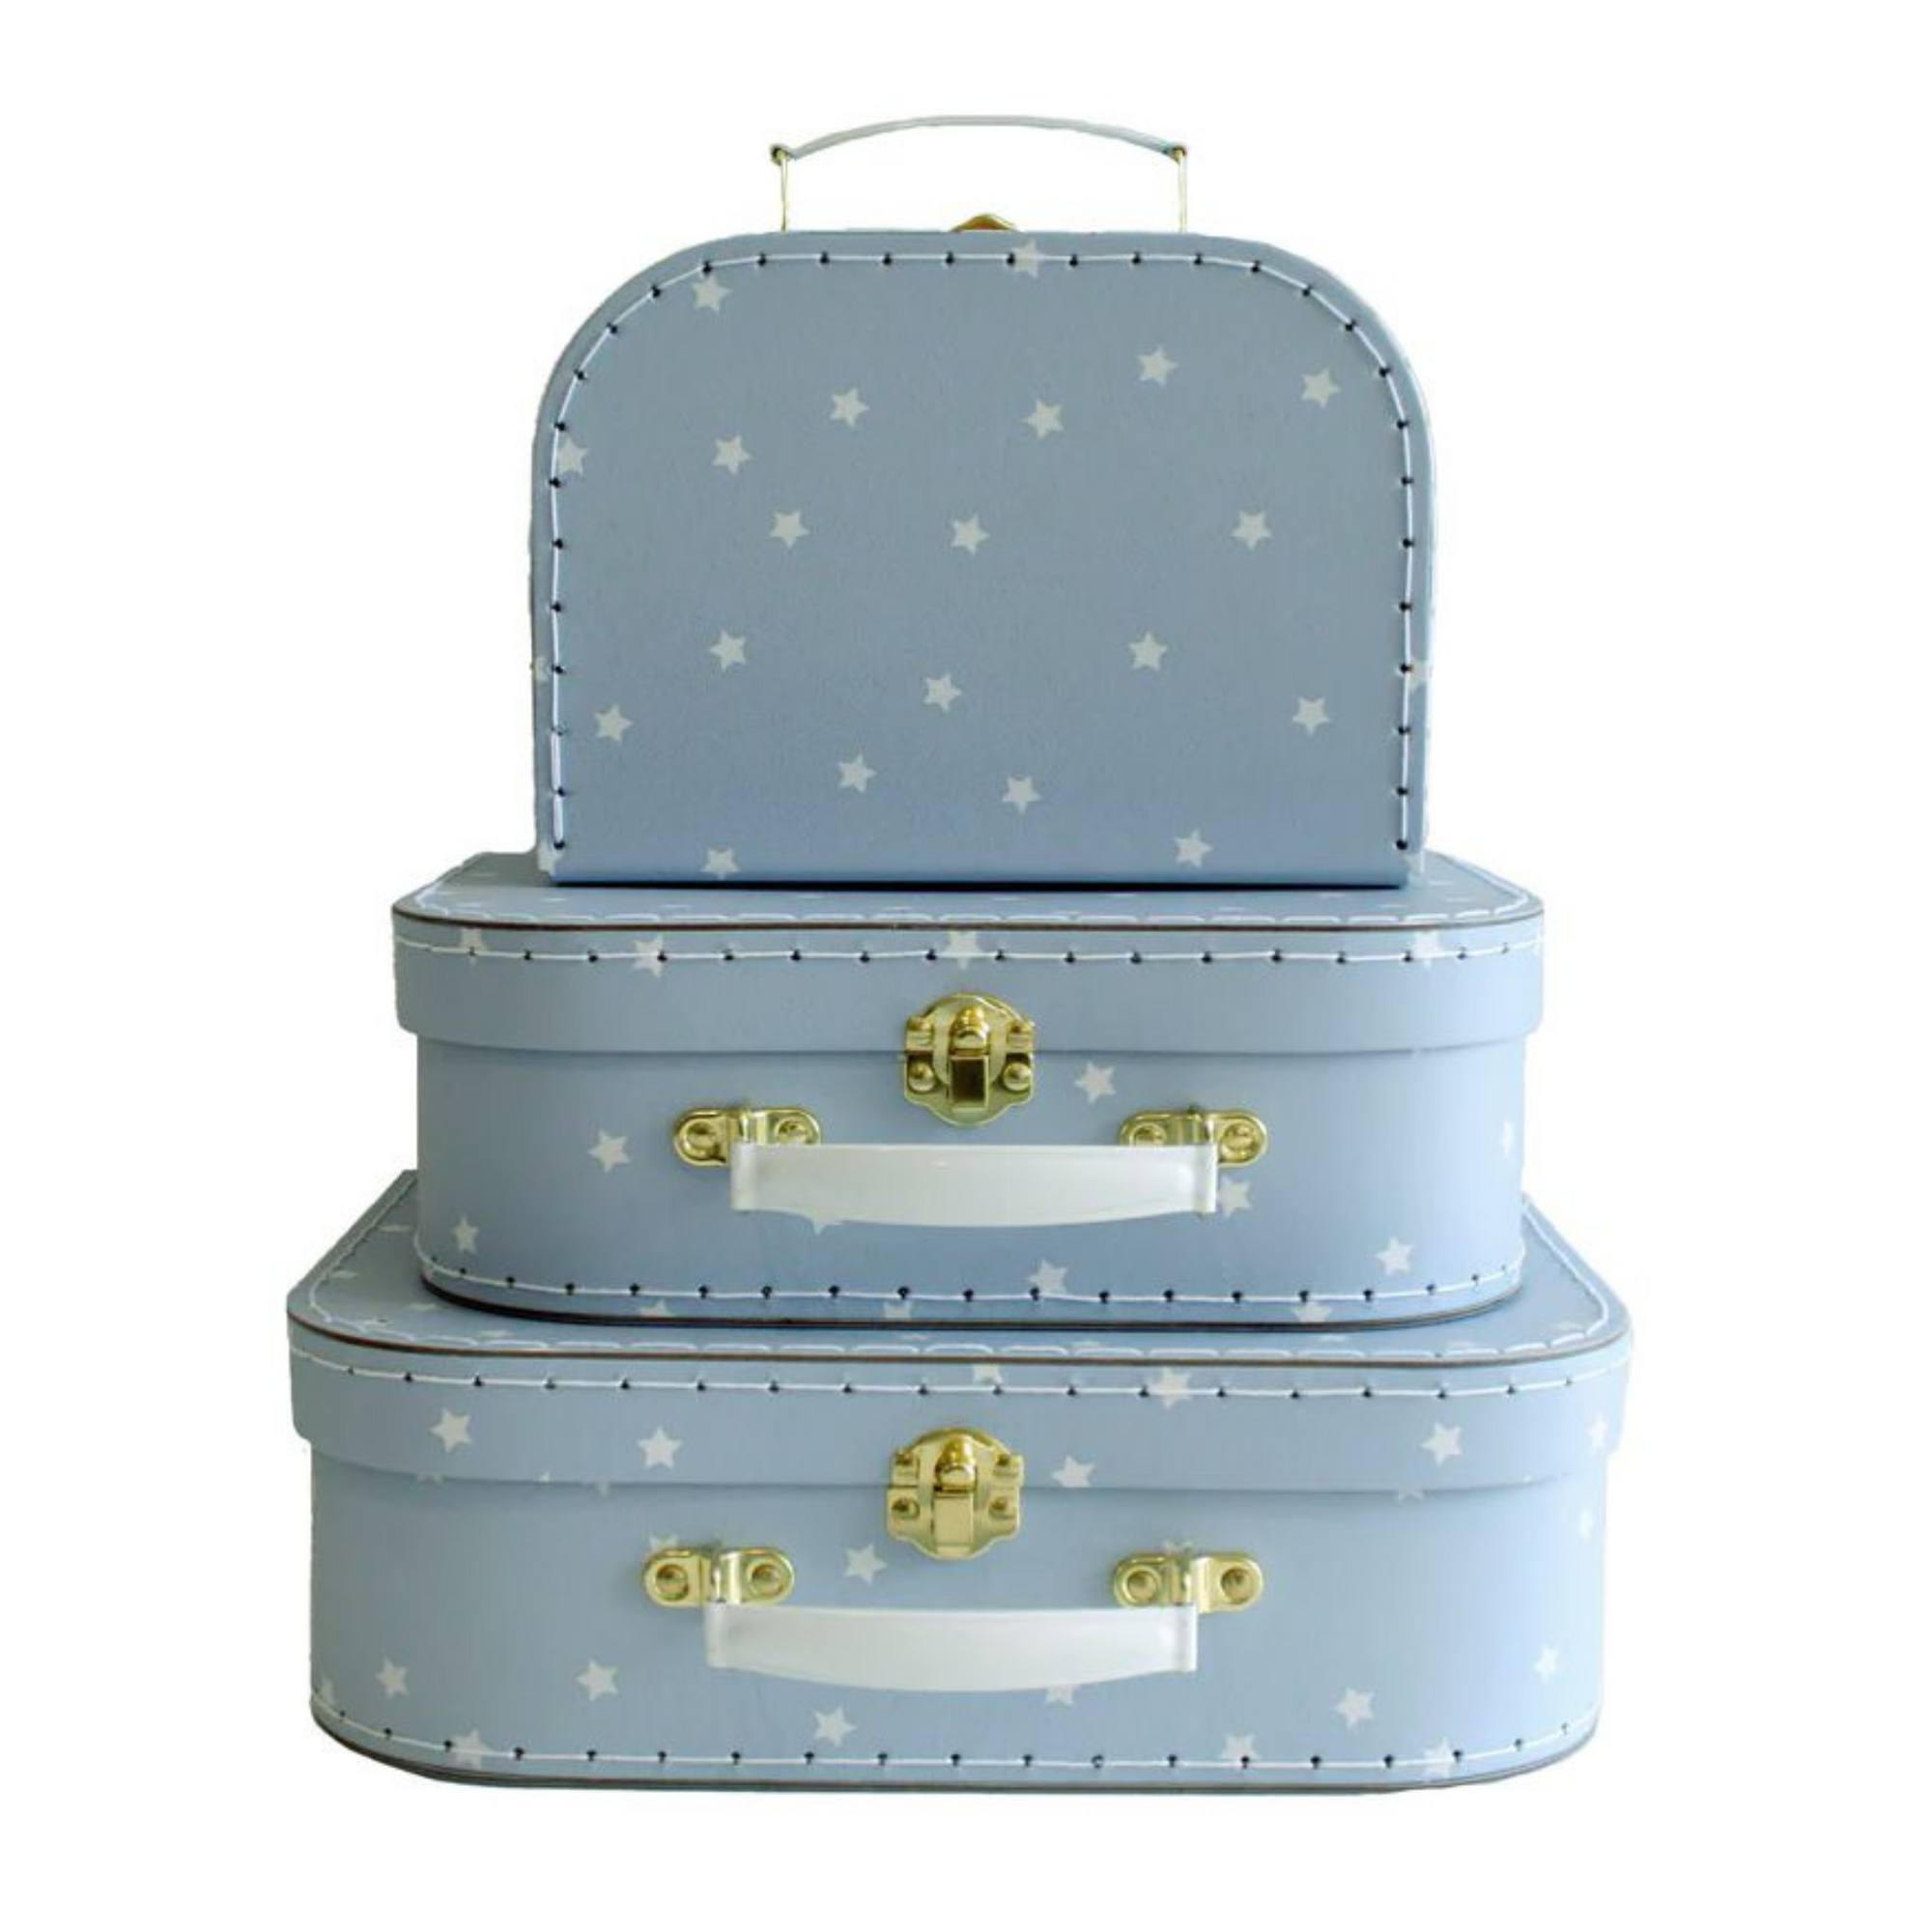 Alimrose Blue Star Cases - sold seperately